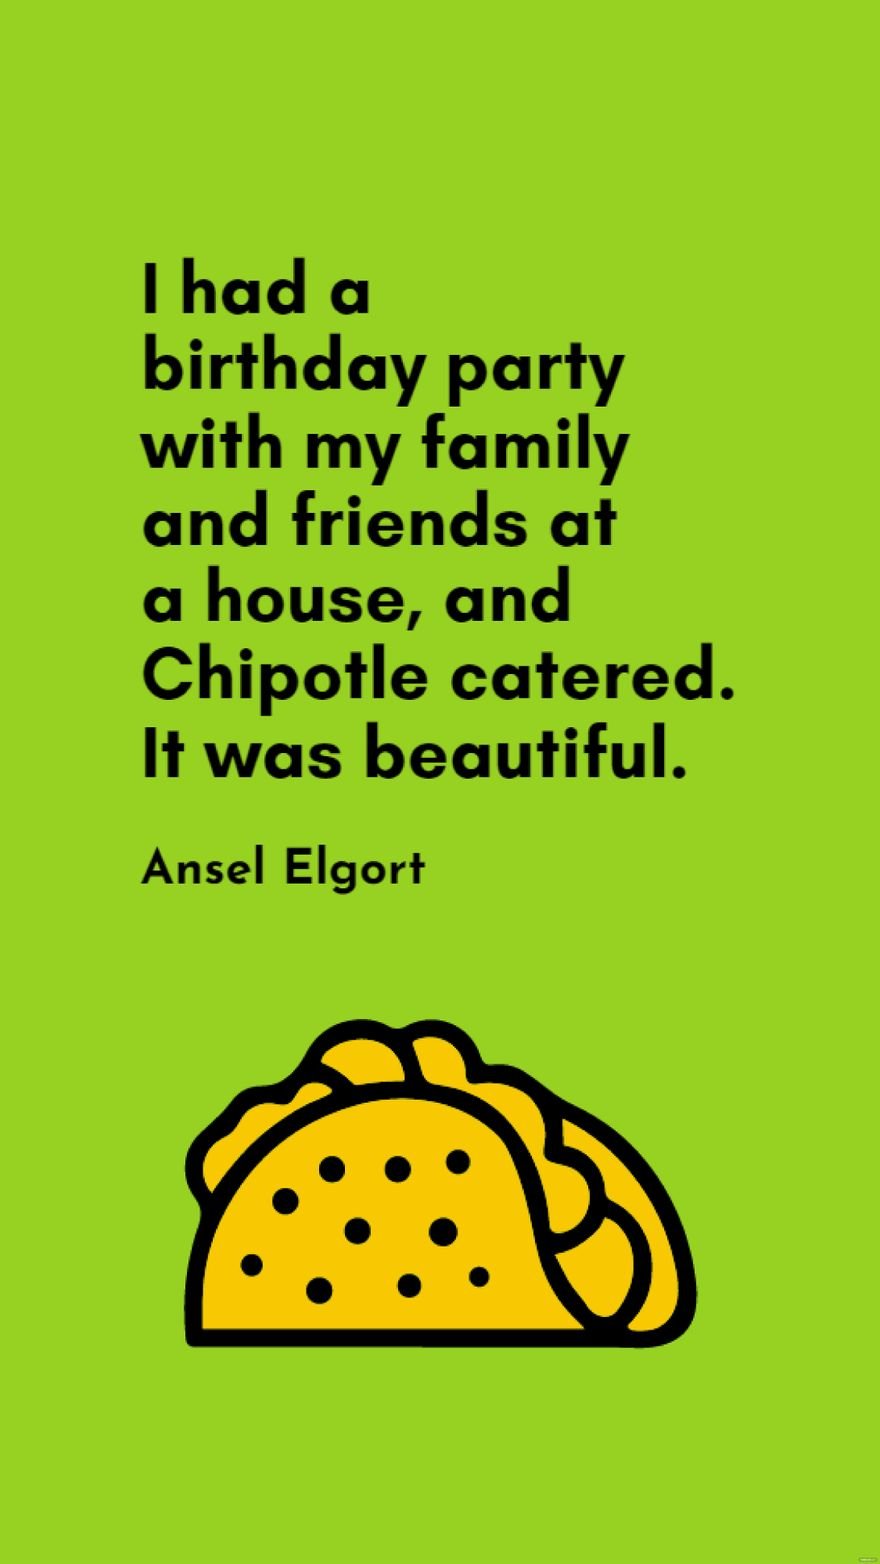 Ansel Elgort - I had a birthday party with my family and friends at a house, and Chipotle catered. It was beautiful.